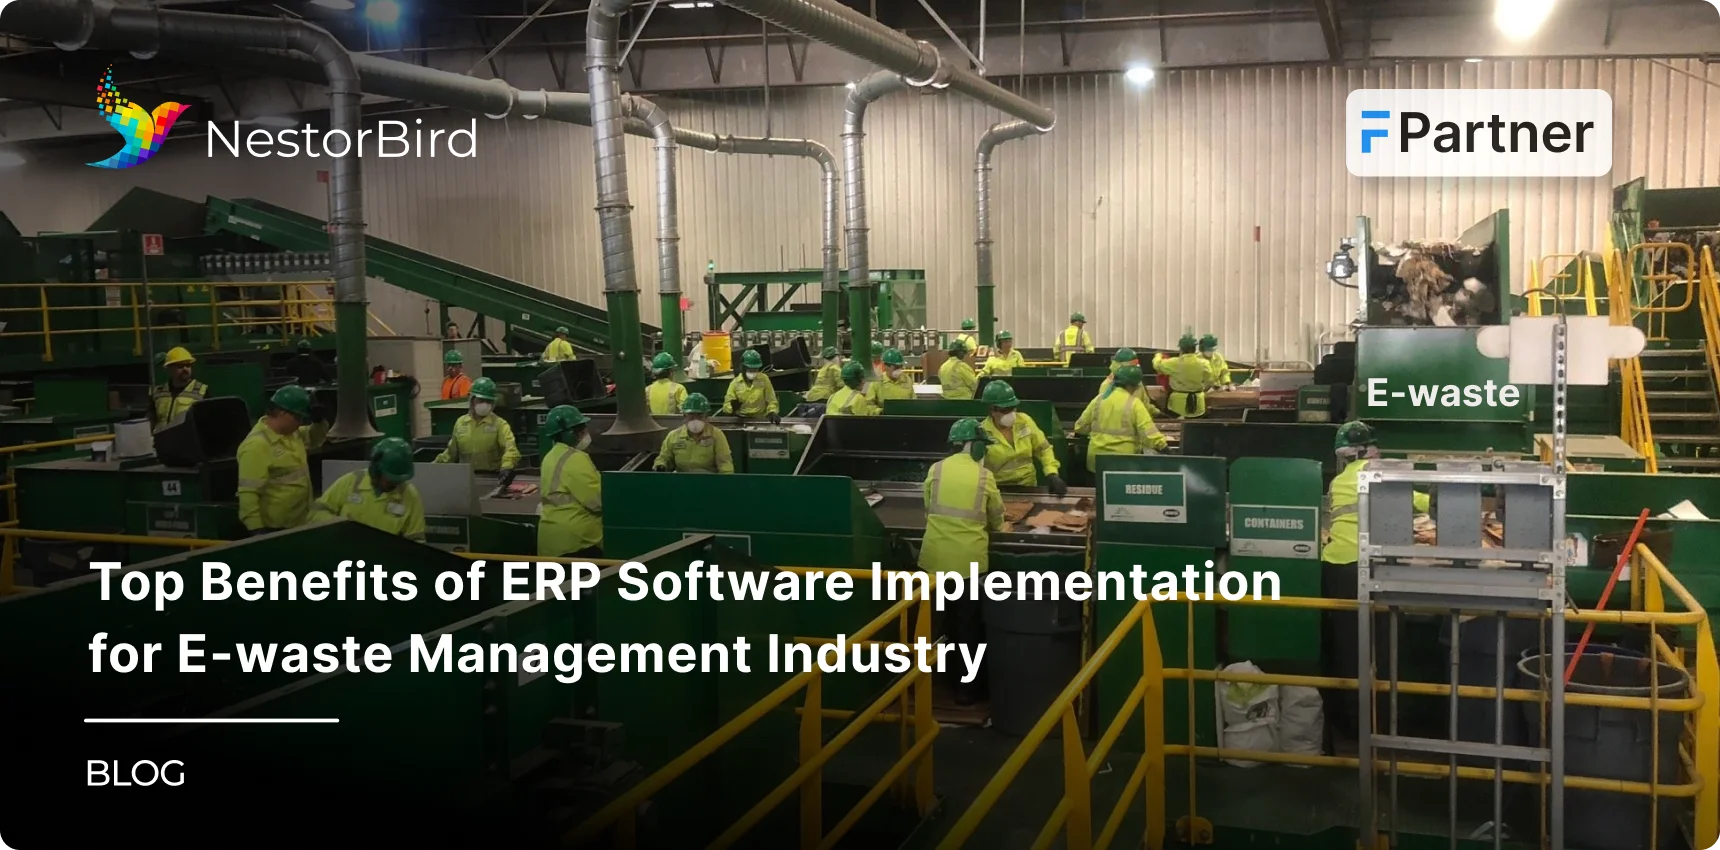 Top Benefits of ERP Software Implementation for the E-waste Management Industry